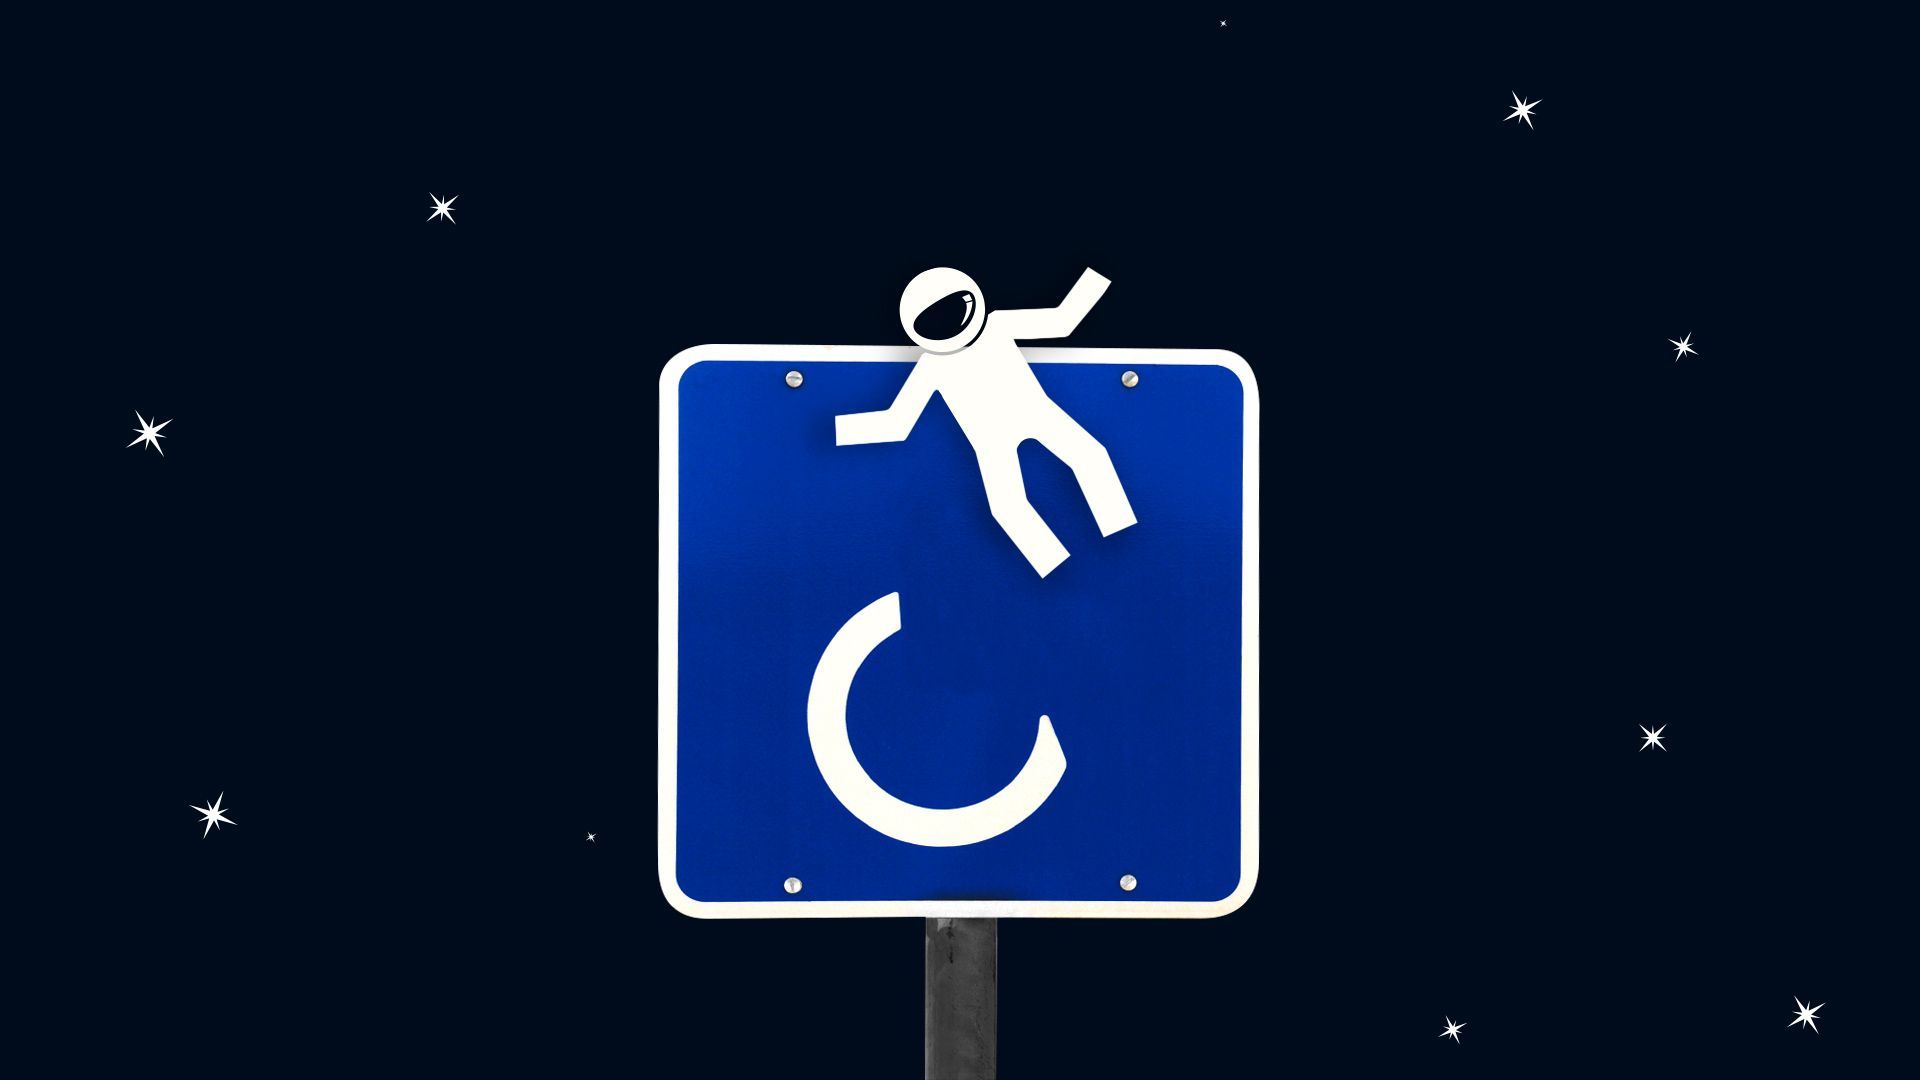 Illustration of a handicap sign with the figure wearing an astronaut helmet and floating away from the sign up towards the stars. 